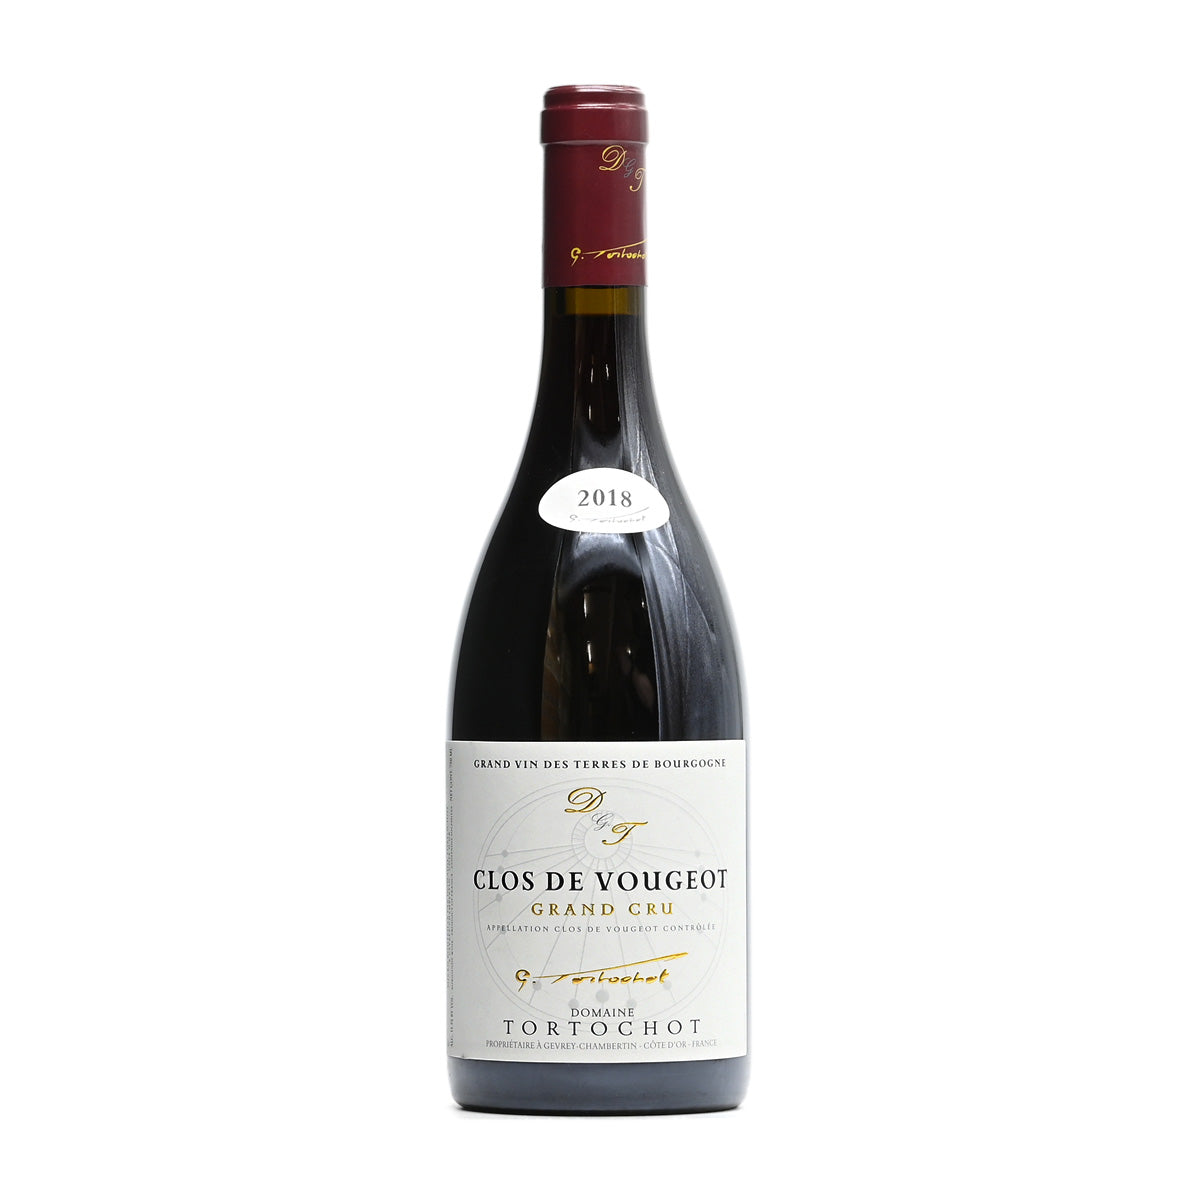 Tortochot Clos Vougeot 2018 a French red wine made from pinot noir from Clos de Vougeot, Grand Cru Burgundy, France